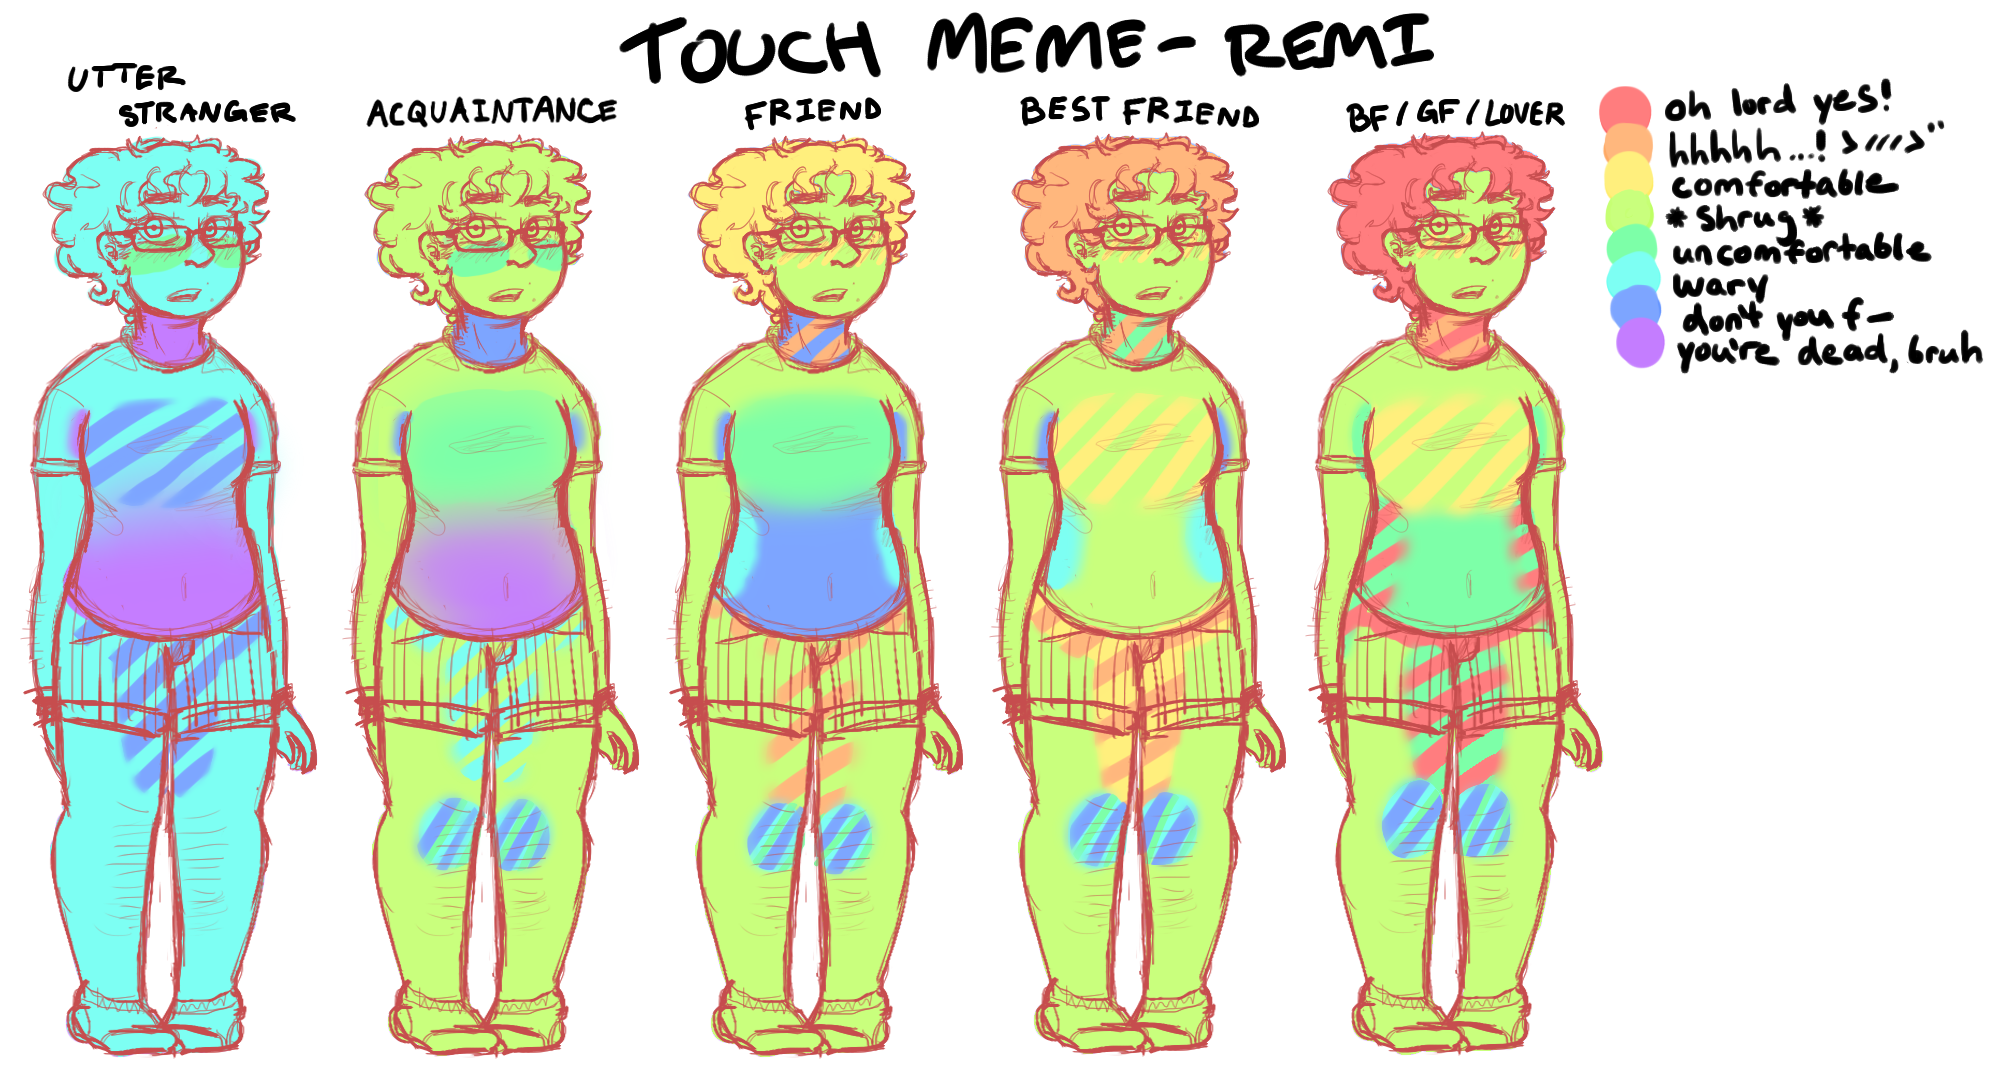 Touch Meme By Marylittlerose On Deviantart.